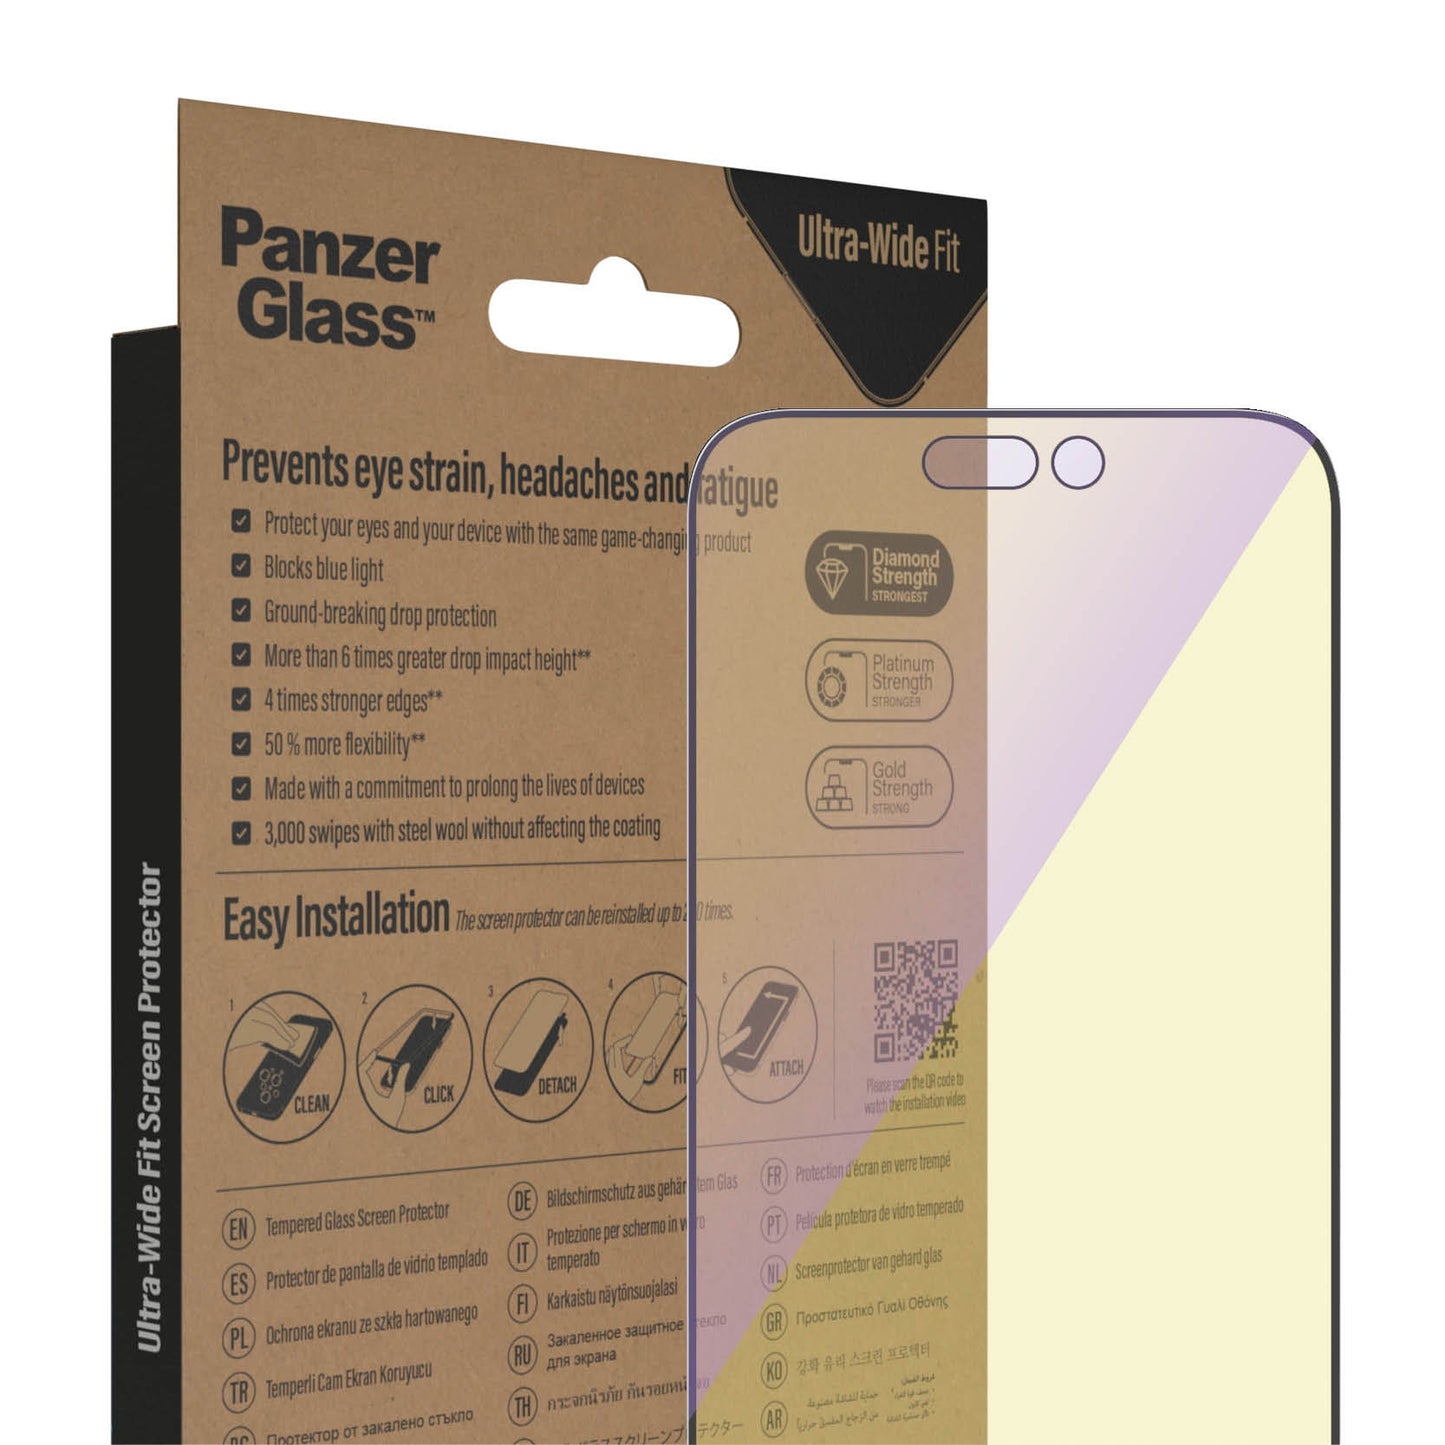 PanzerGlass™ Anti-blue Lgiht Ultra-Wide Fit Screen Protector for iPhone 14 Pro Max - Anti-blue Light